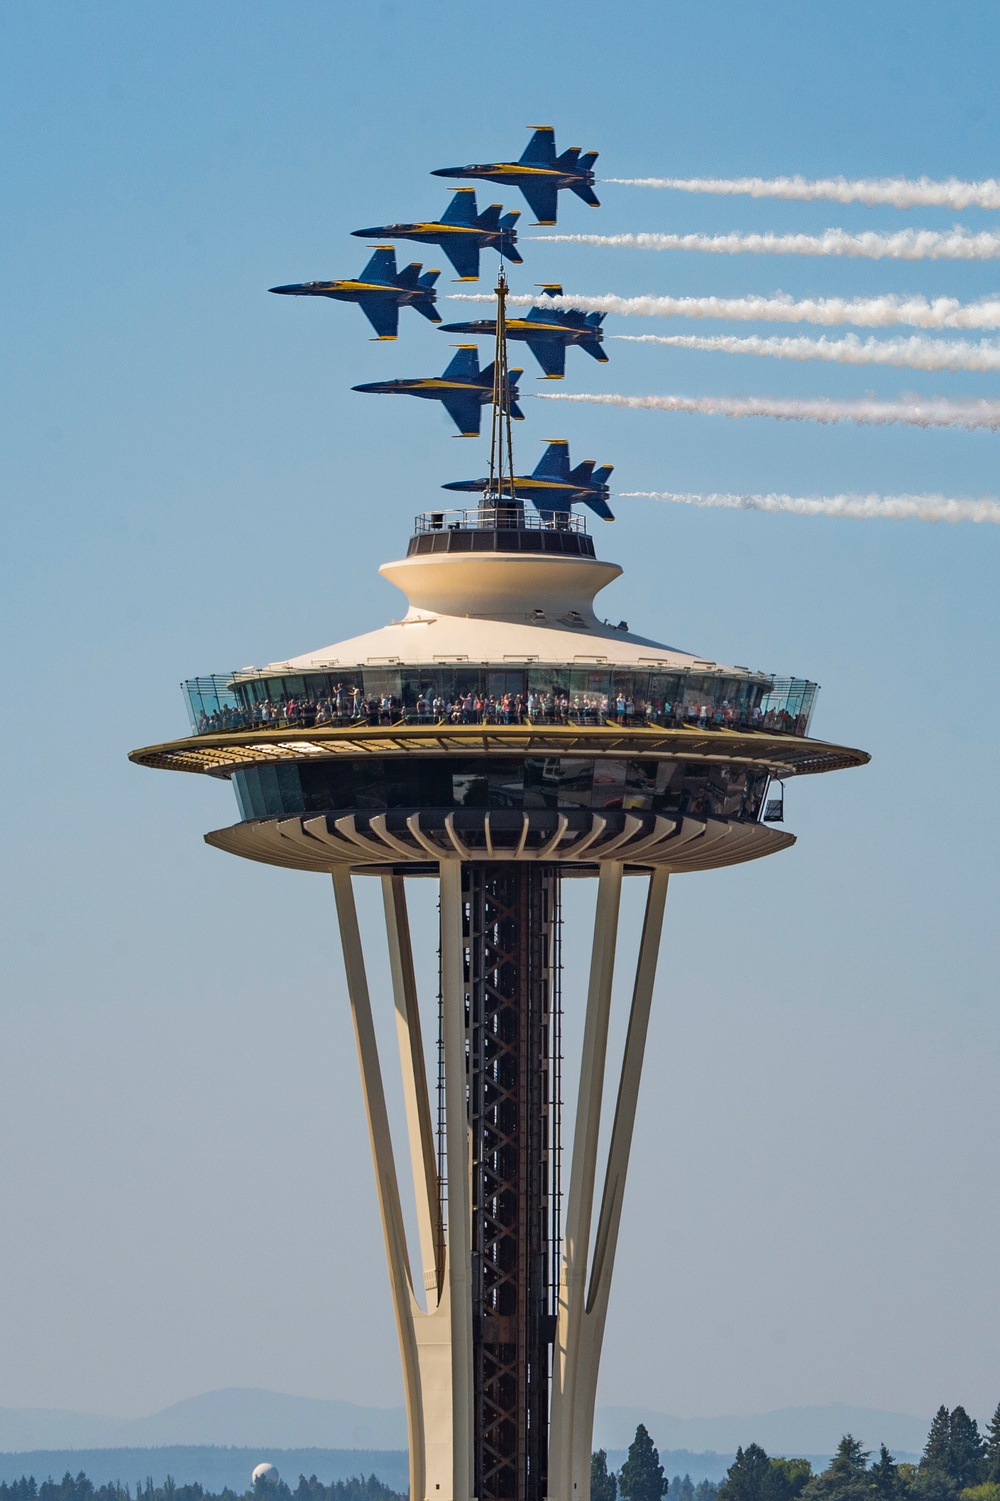 Blue Angels Fly By Seattle Space Needle